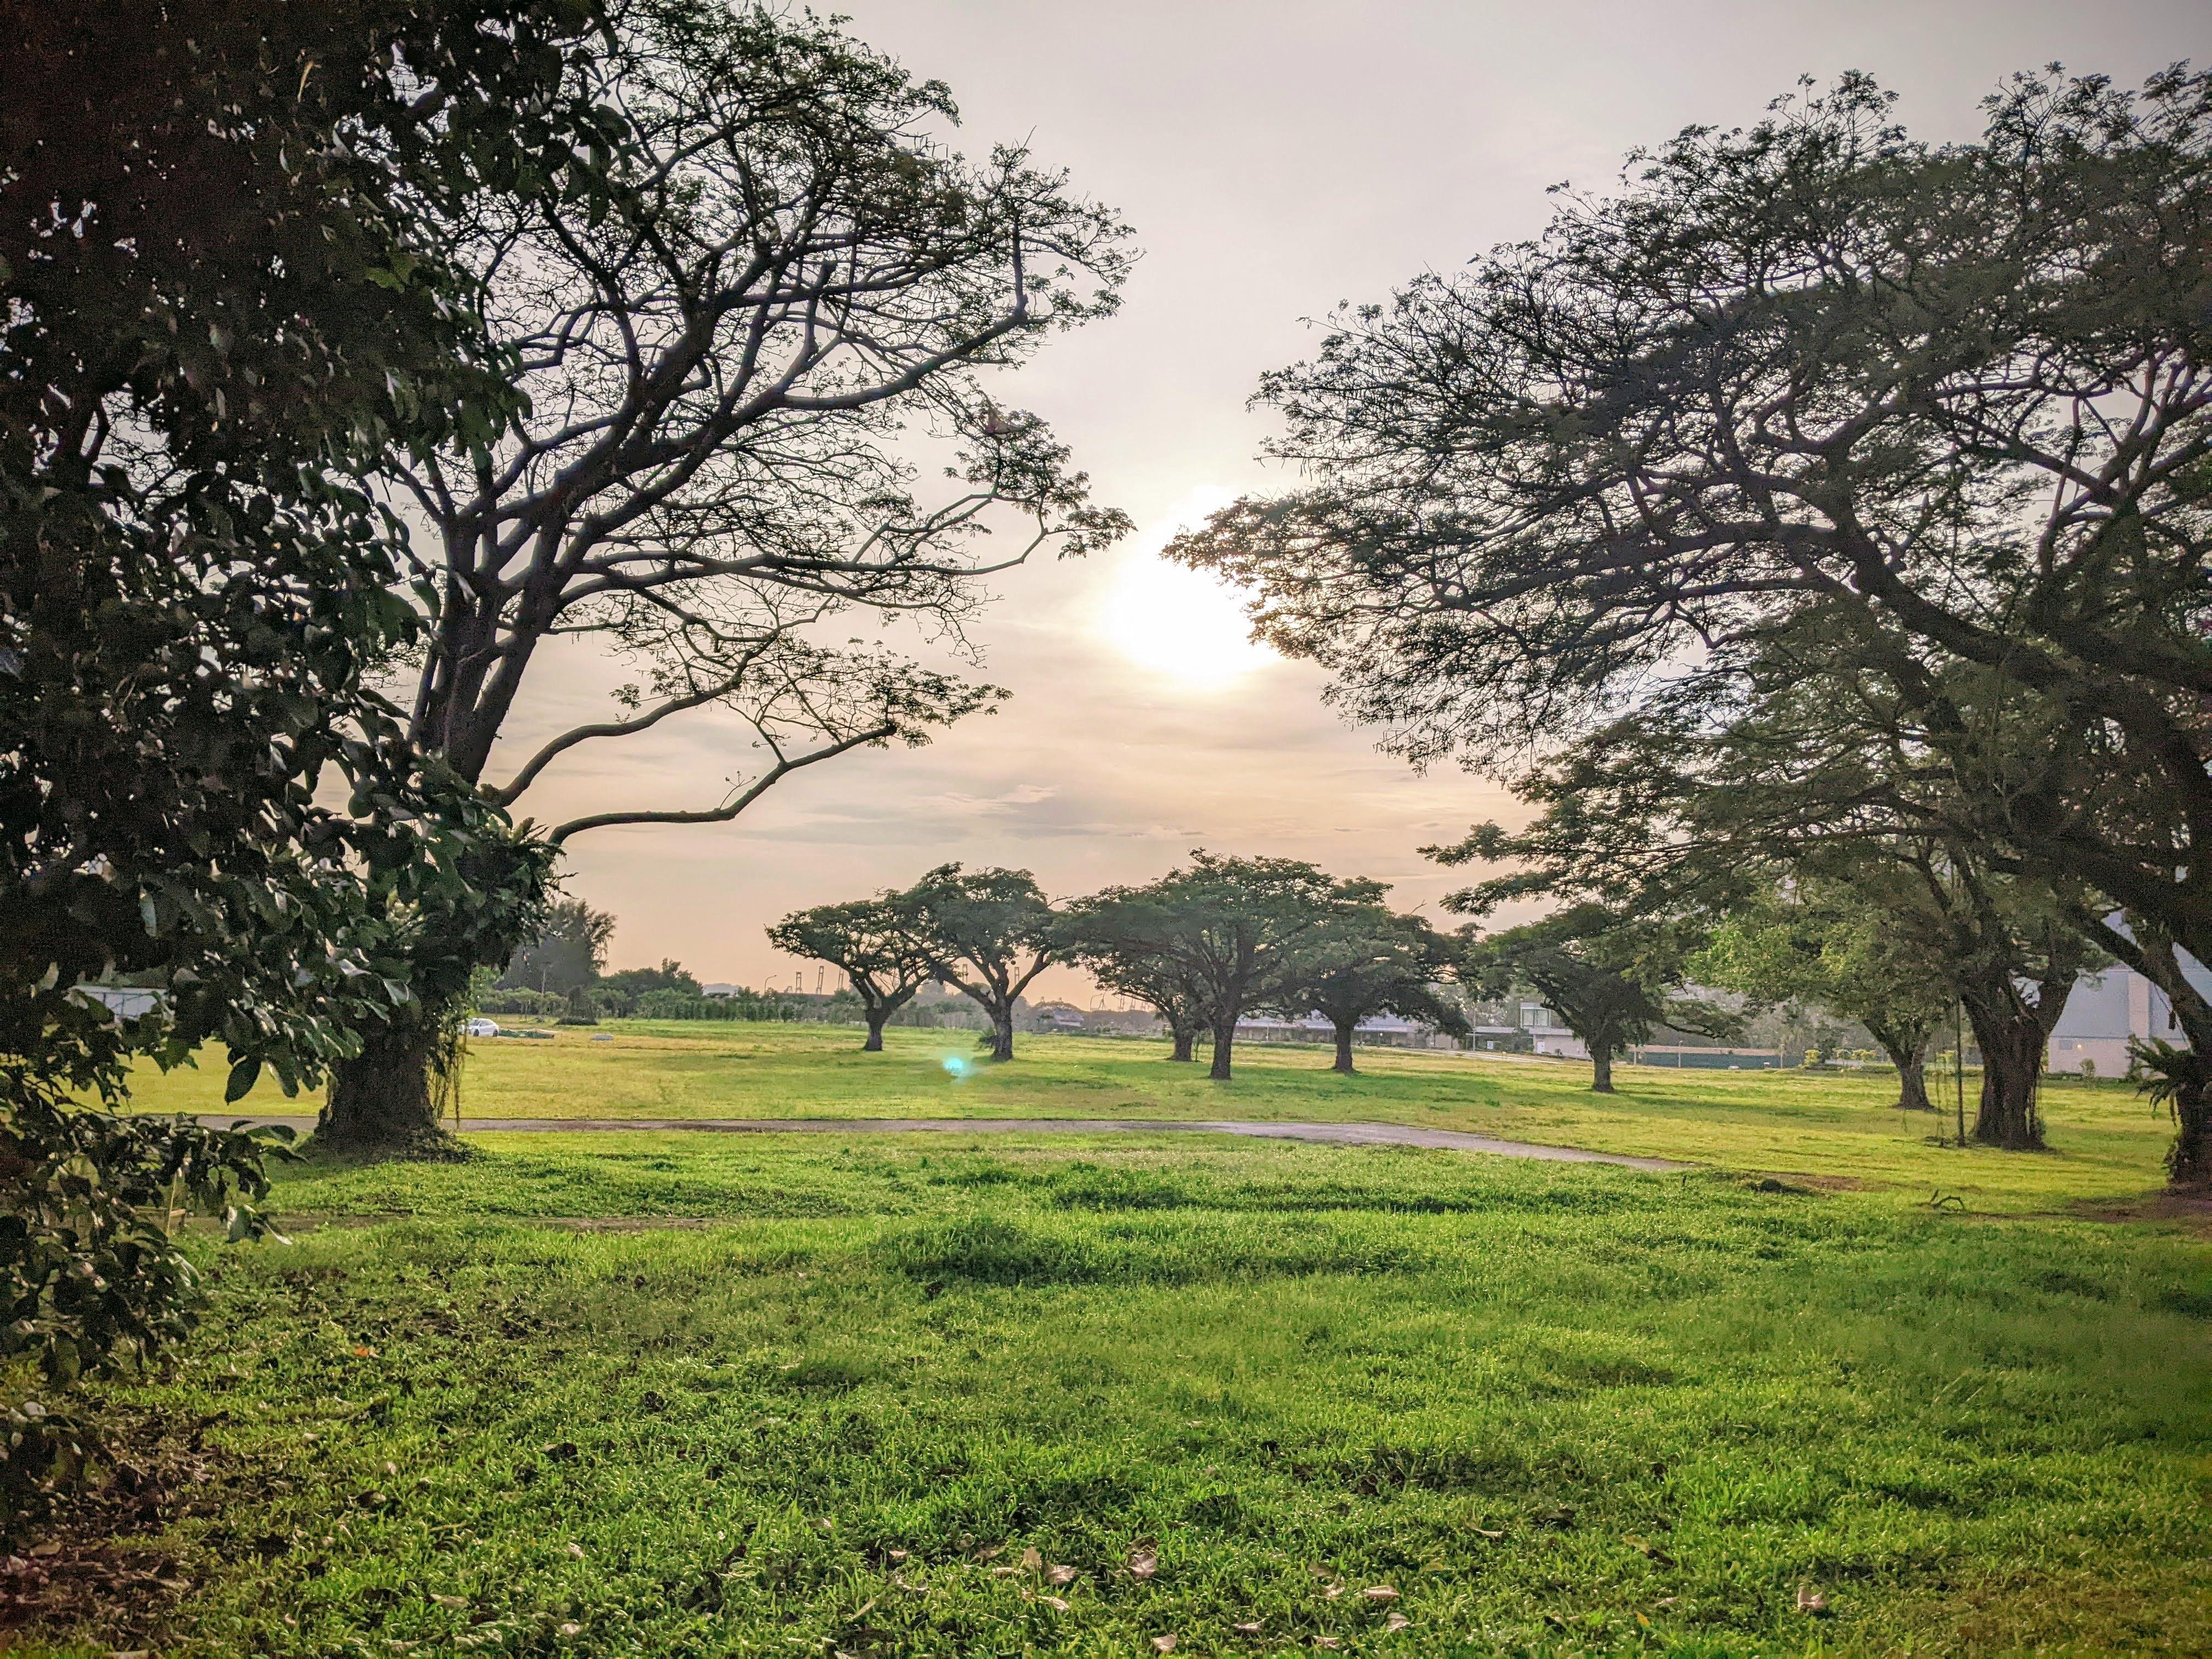 Field of acacia trees in Singapore.